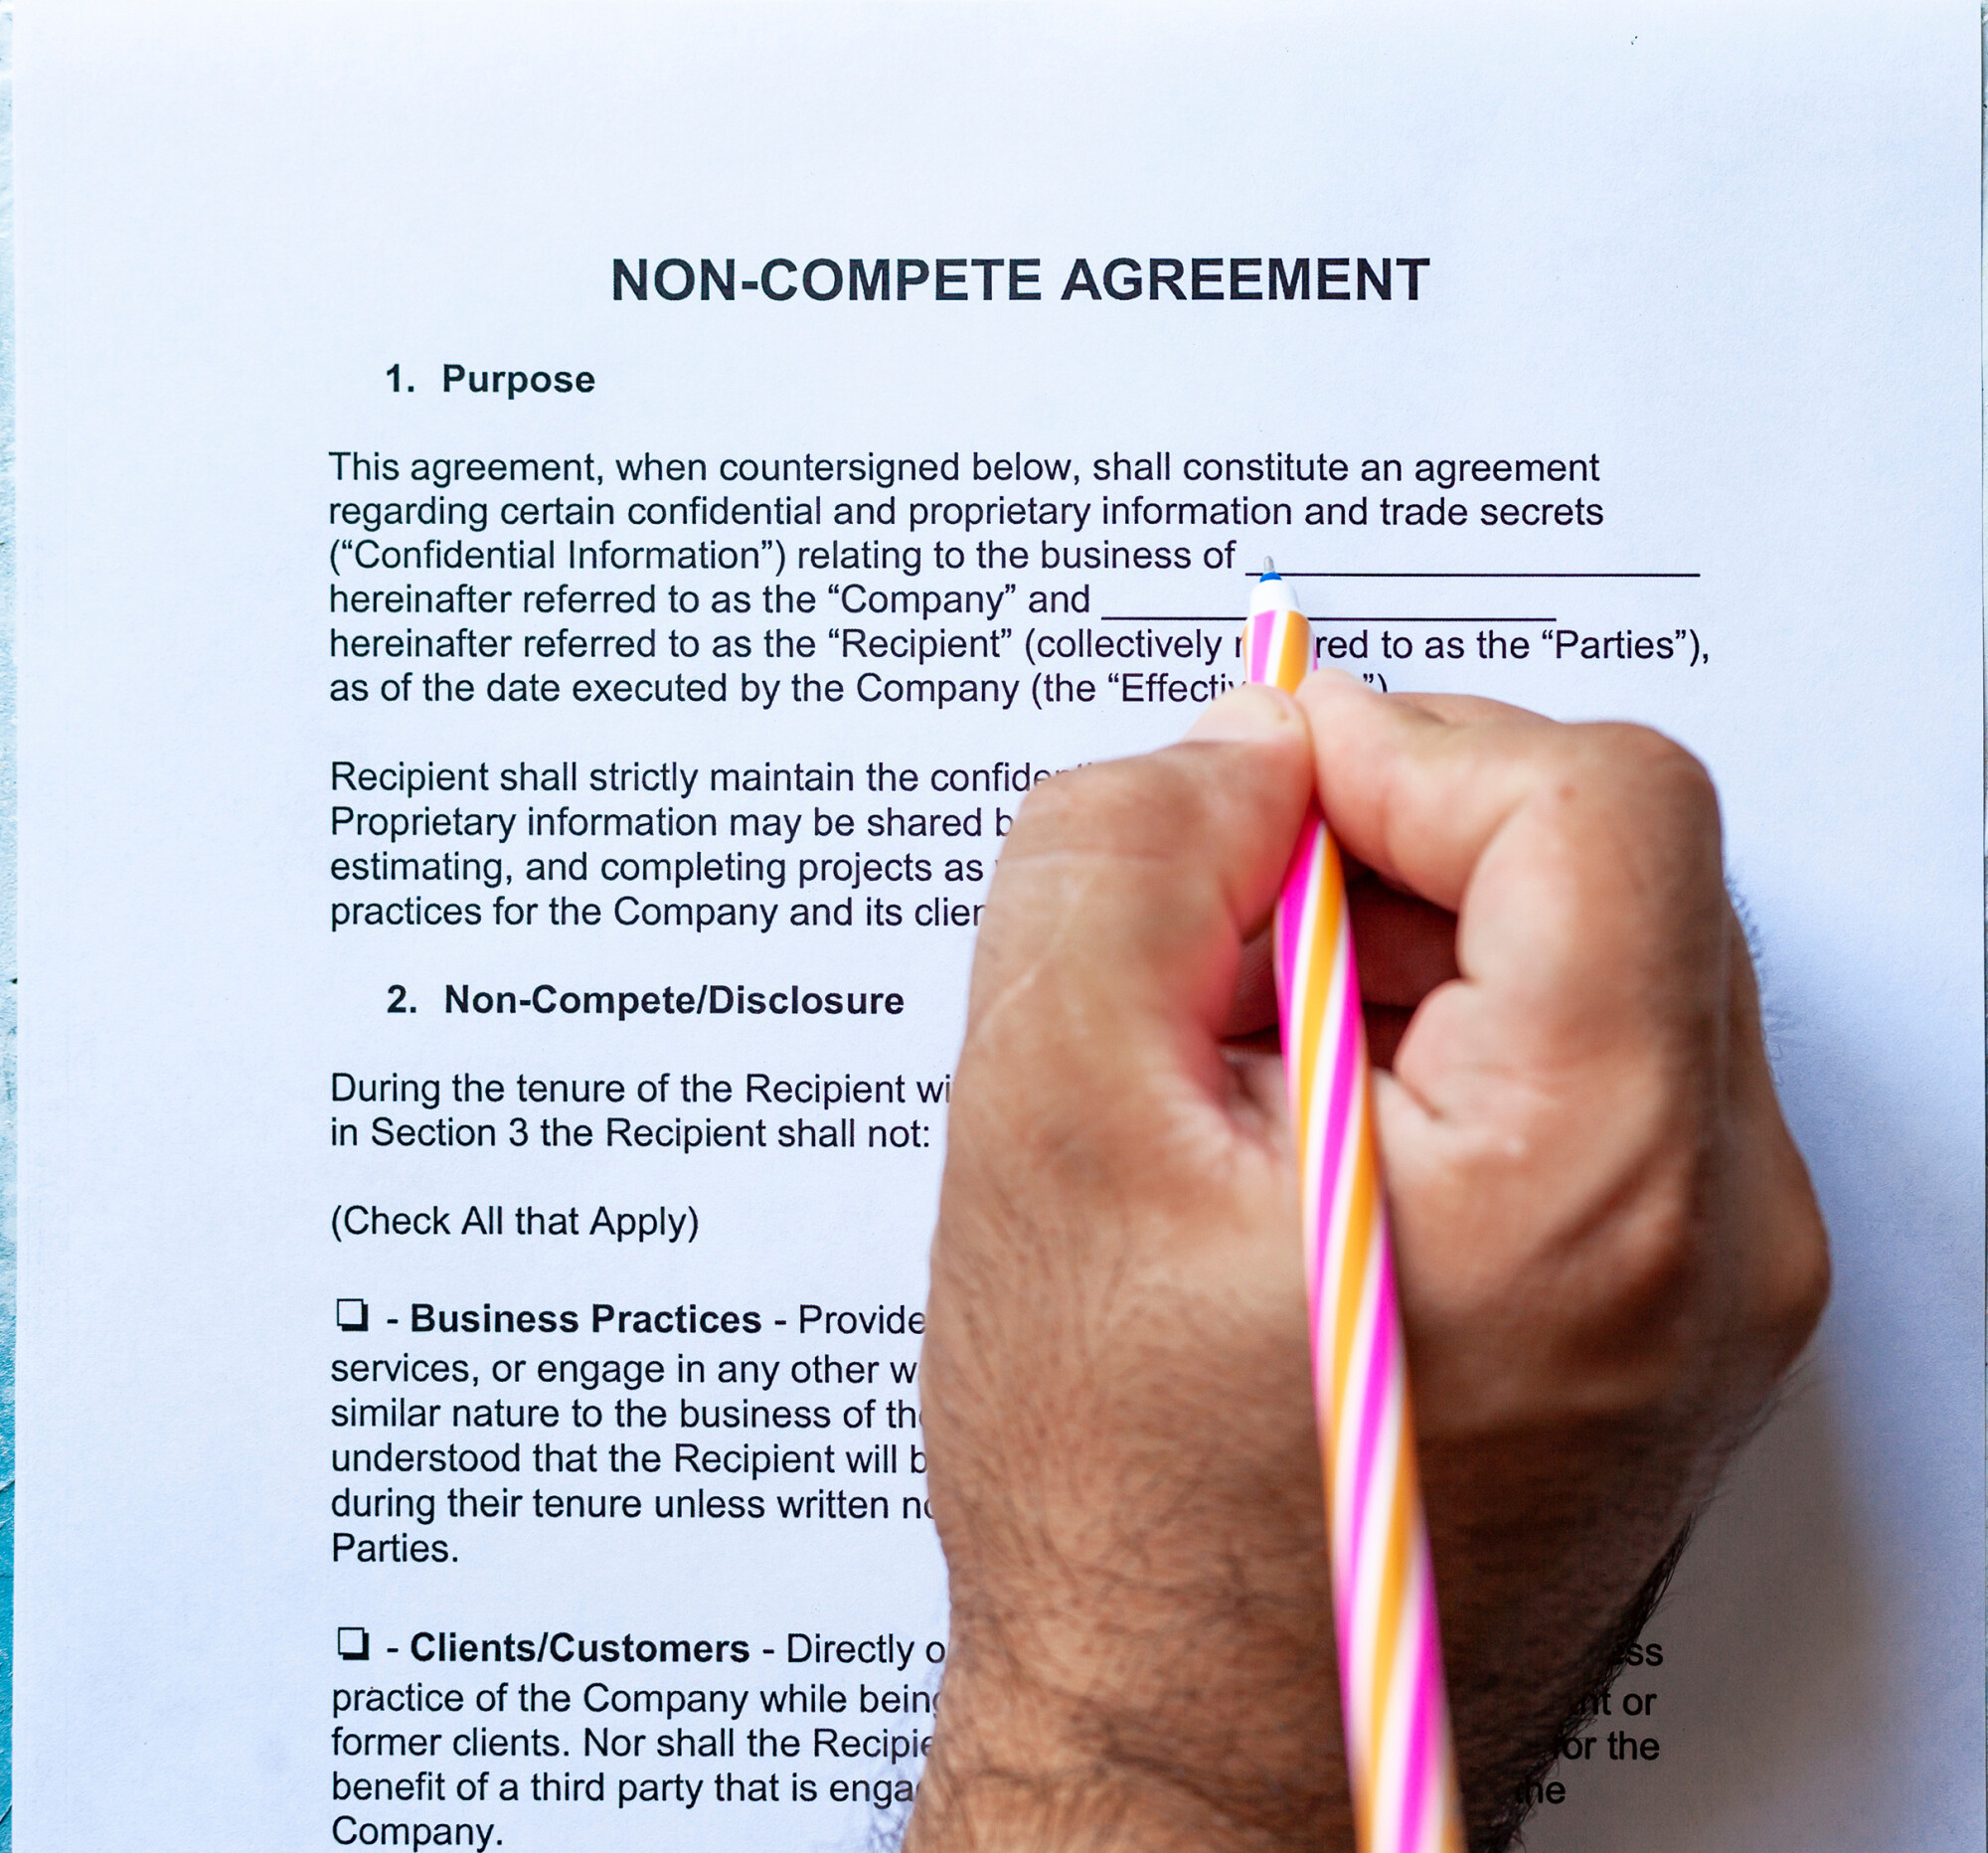 Filling Out Non-Compete Agreement Form